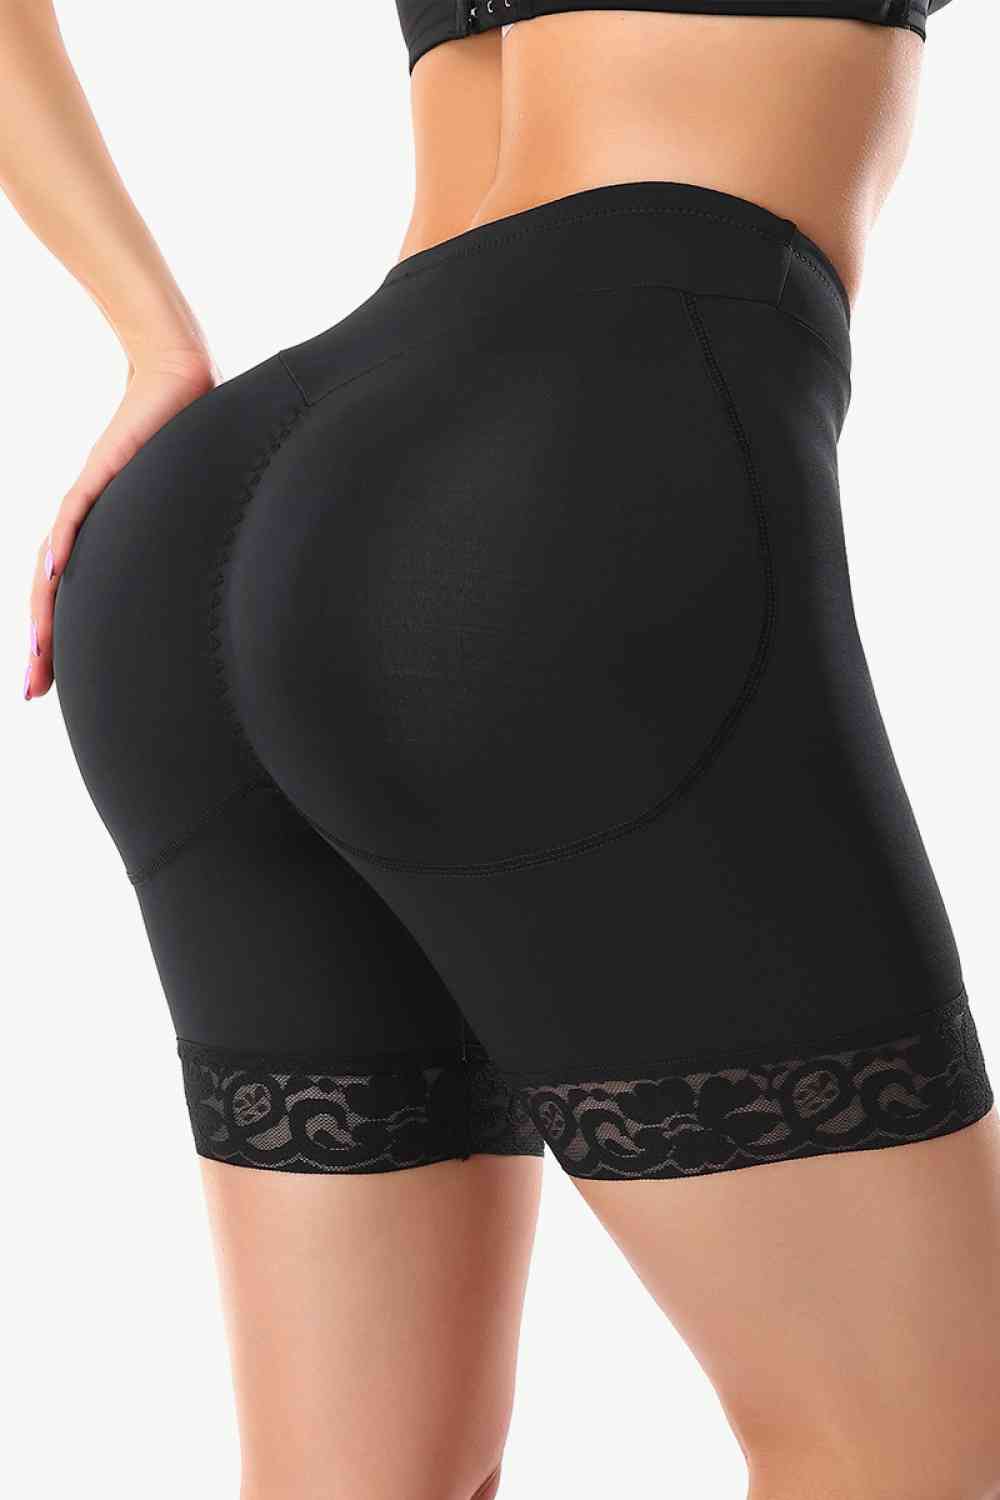 Womens Full Size Lace Trim Lifting Pull-On Shaping Shorts (S-6XL)